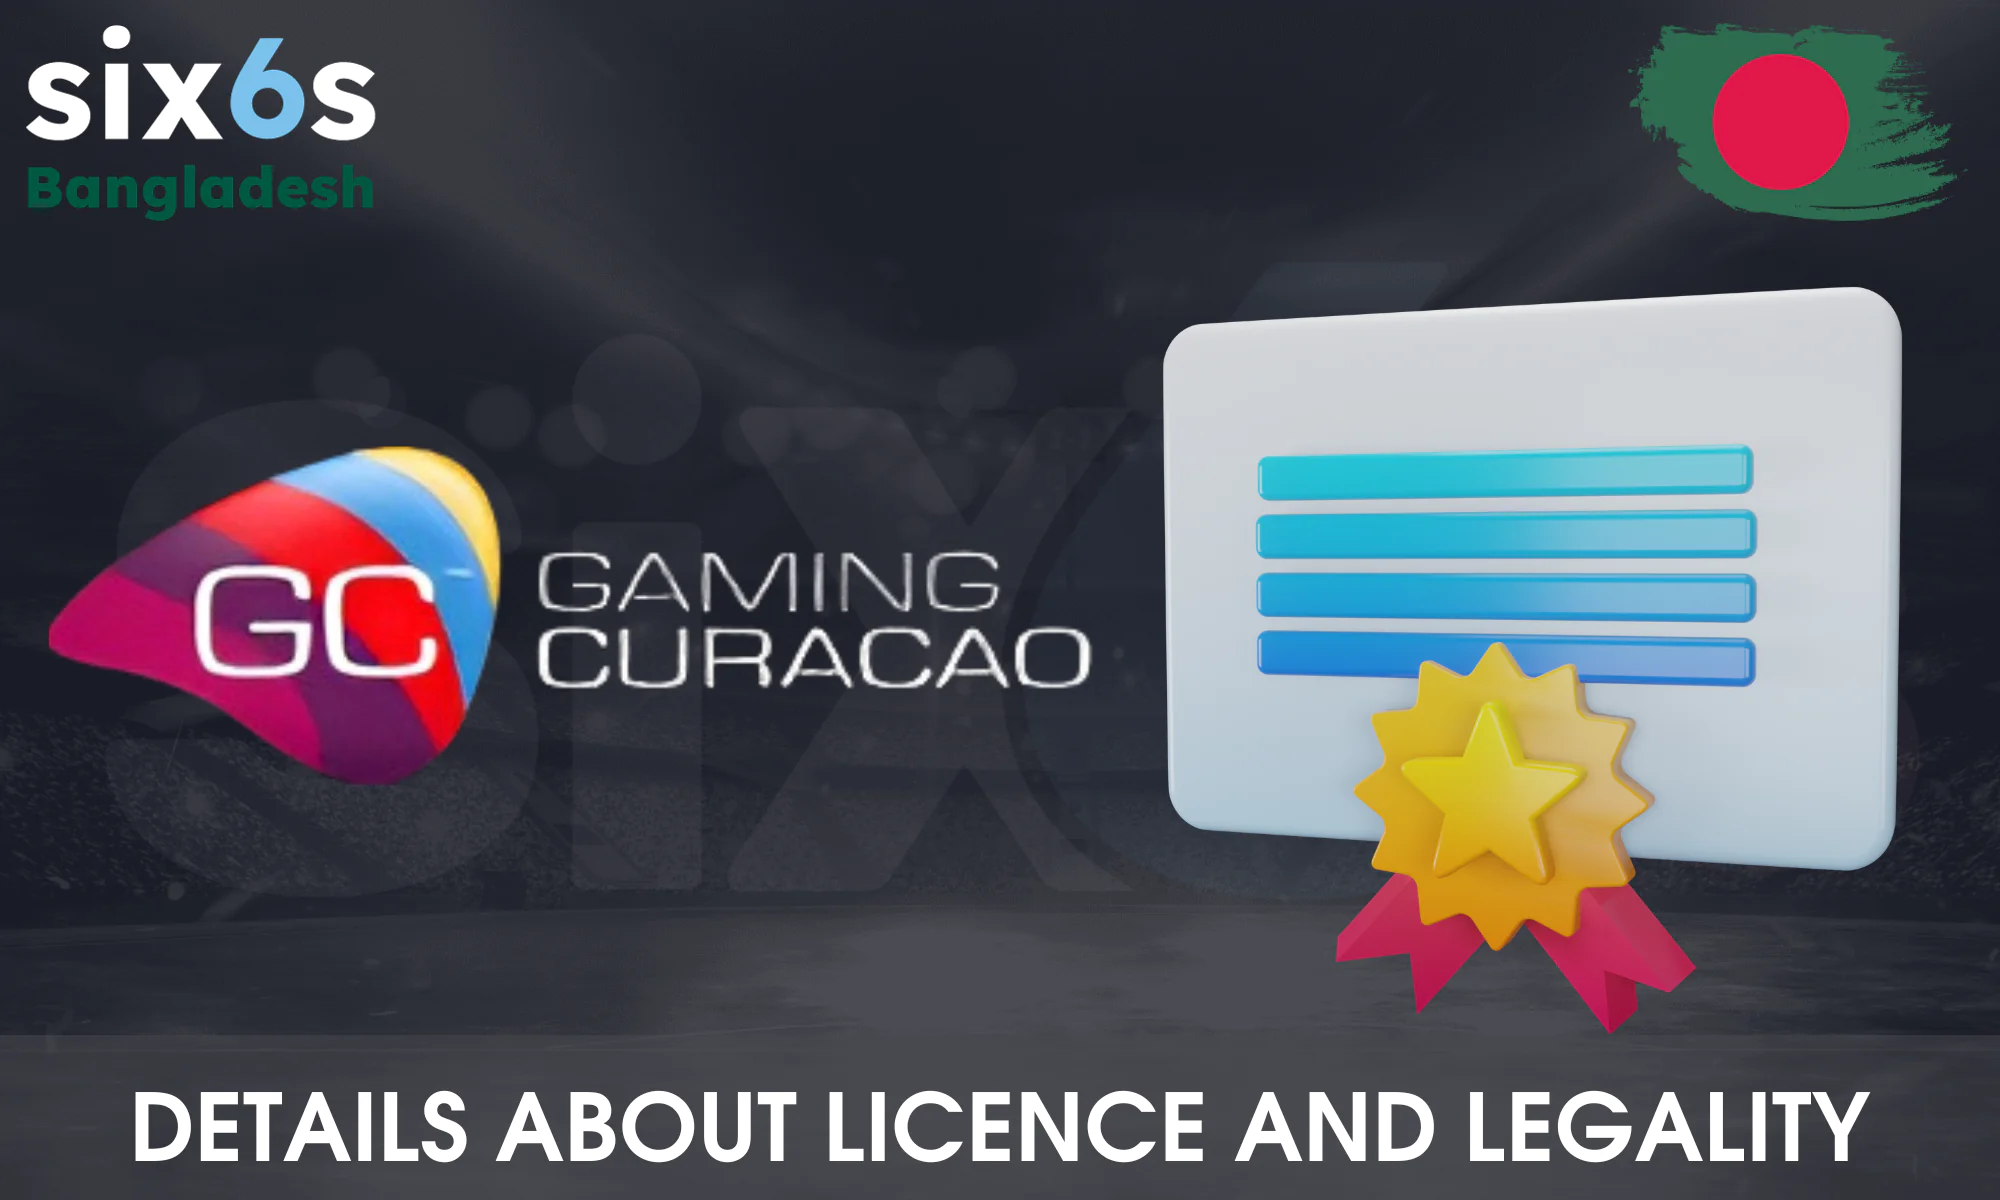 Legality and license of Six6s in Bangladesh